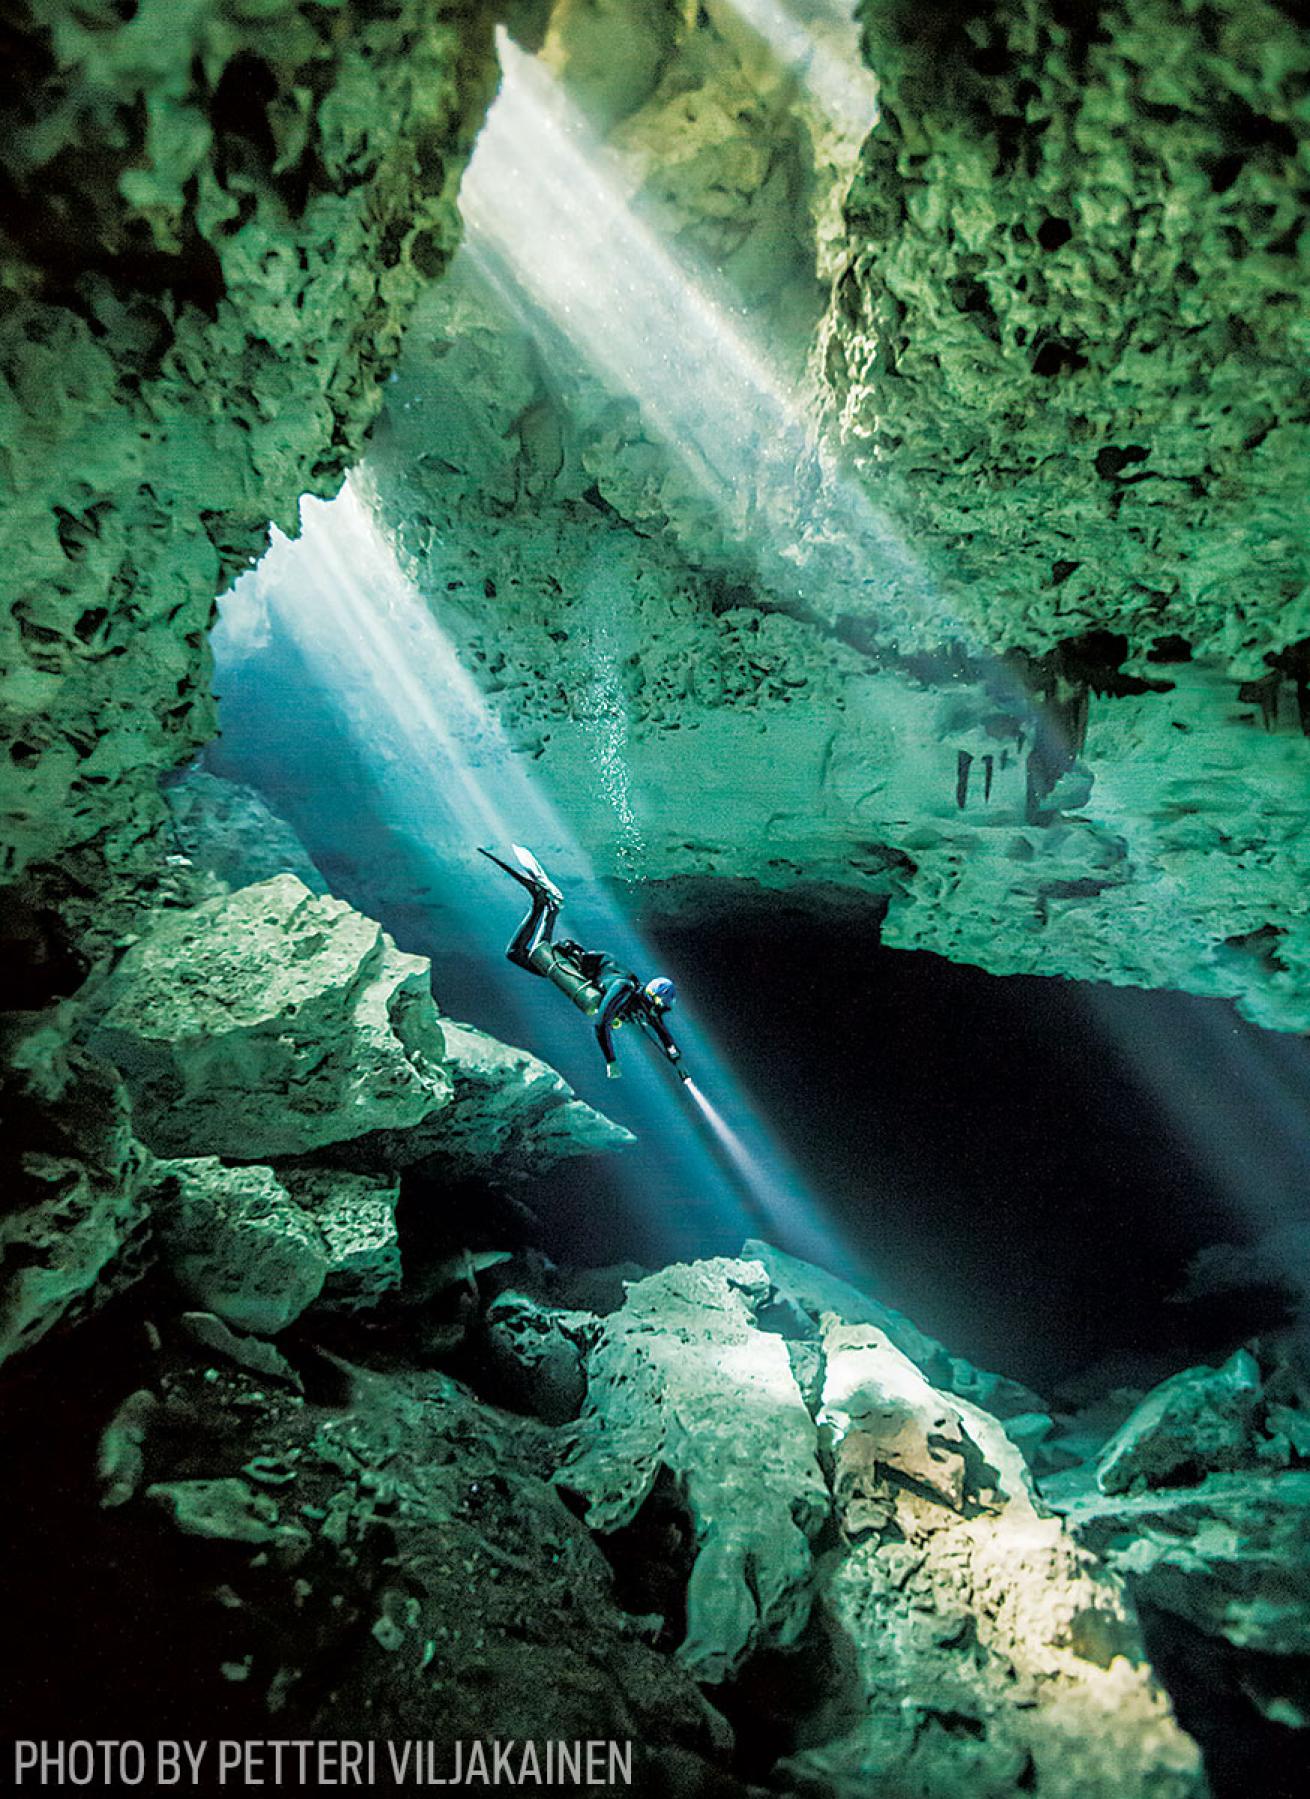 Third Place Wide Angle Winner: Diver in Cenote, Mexico